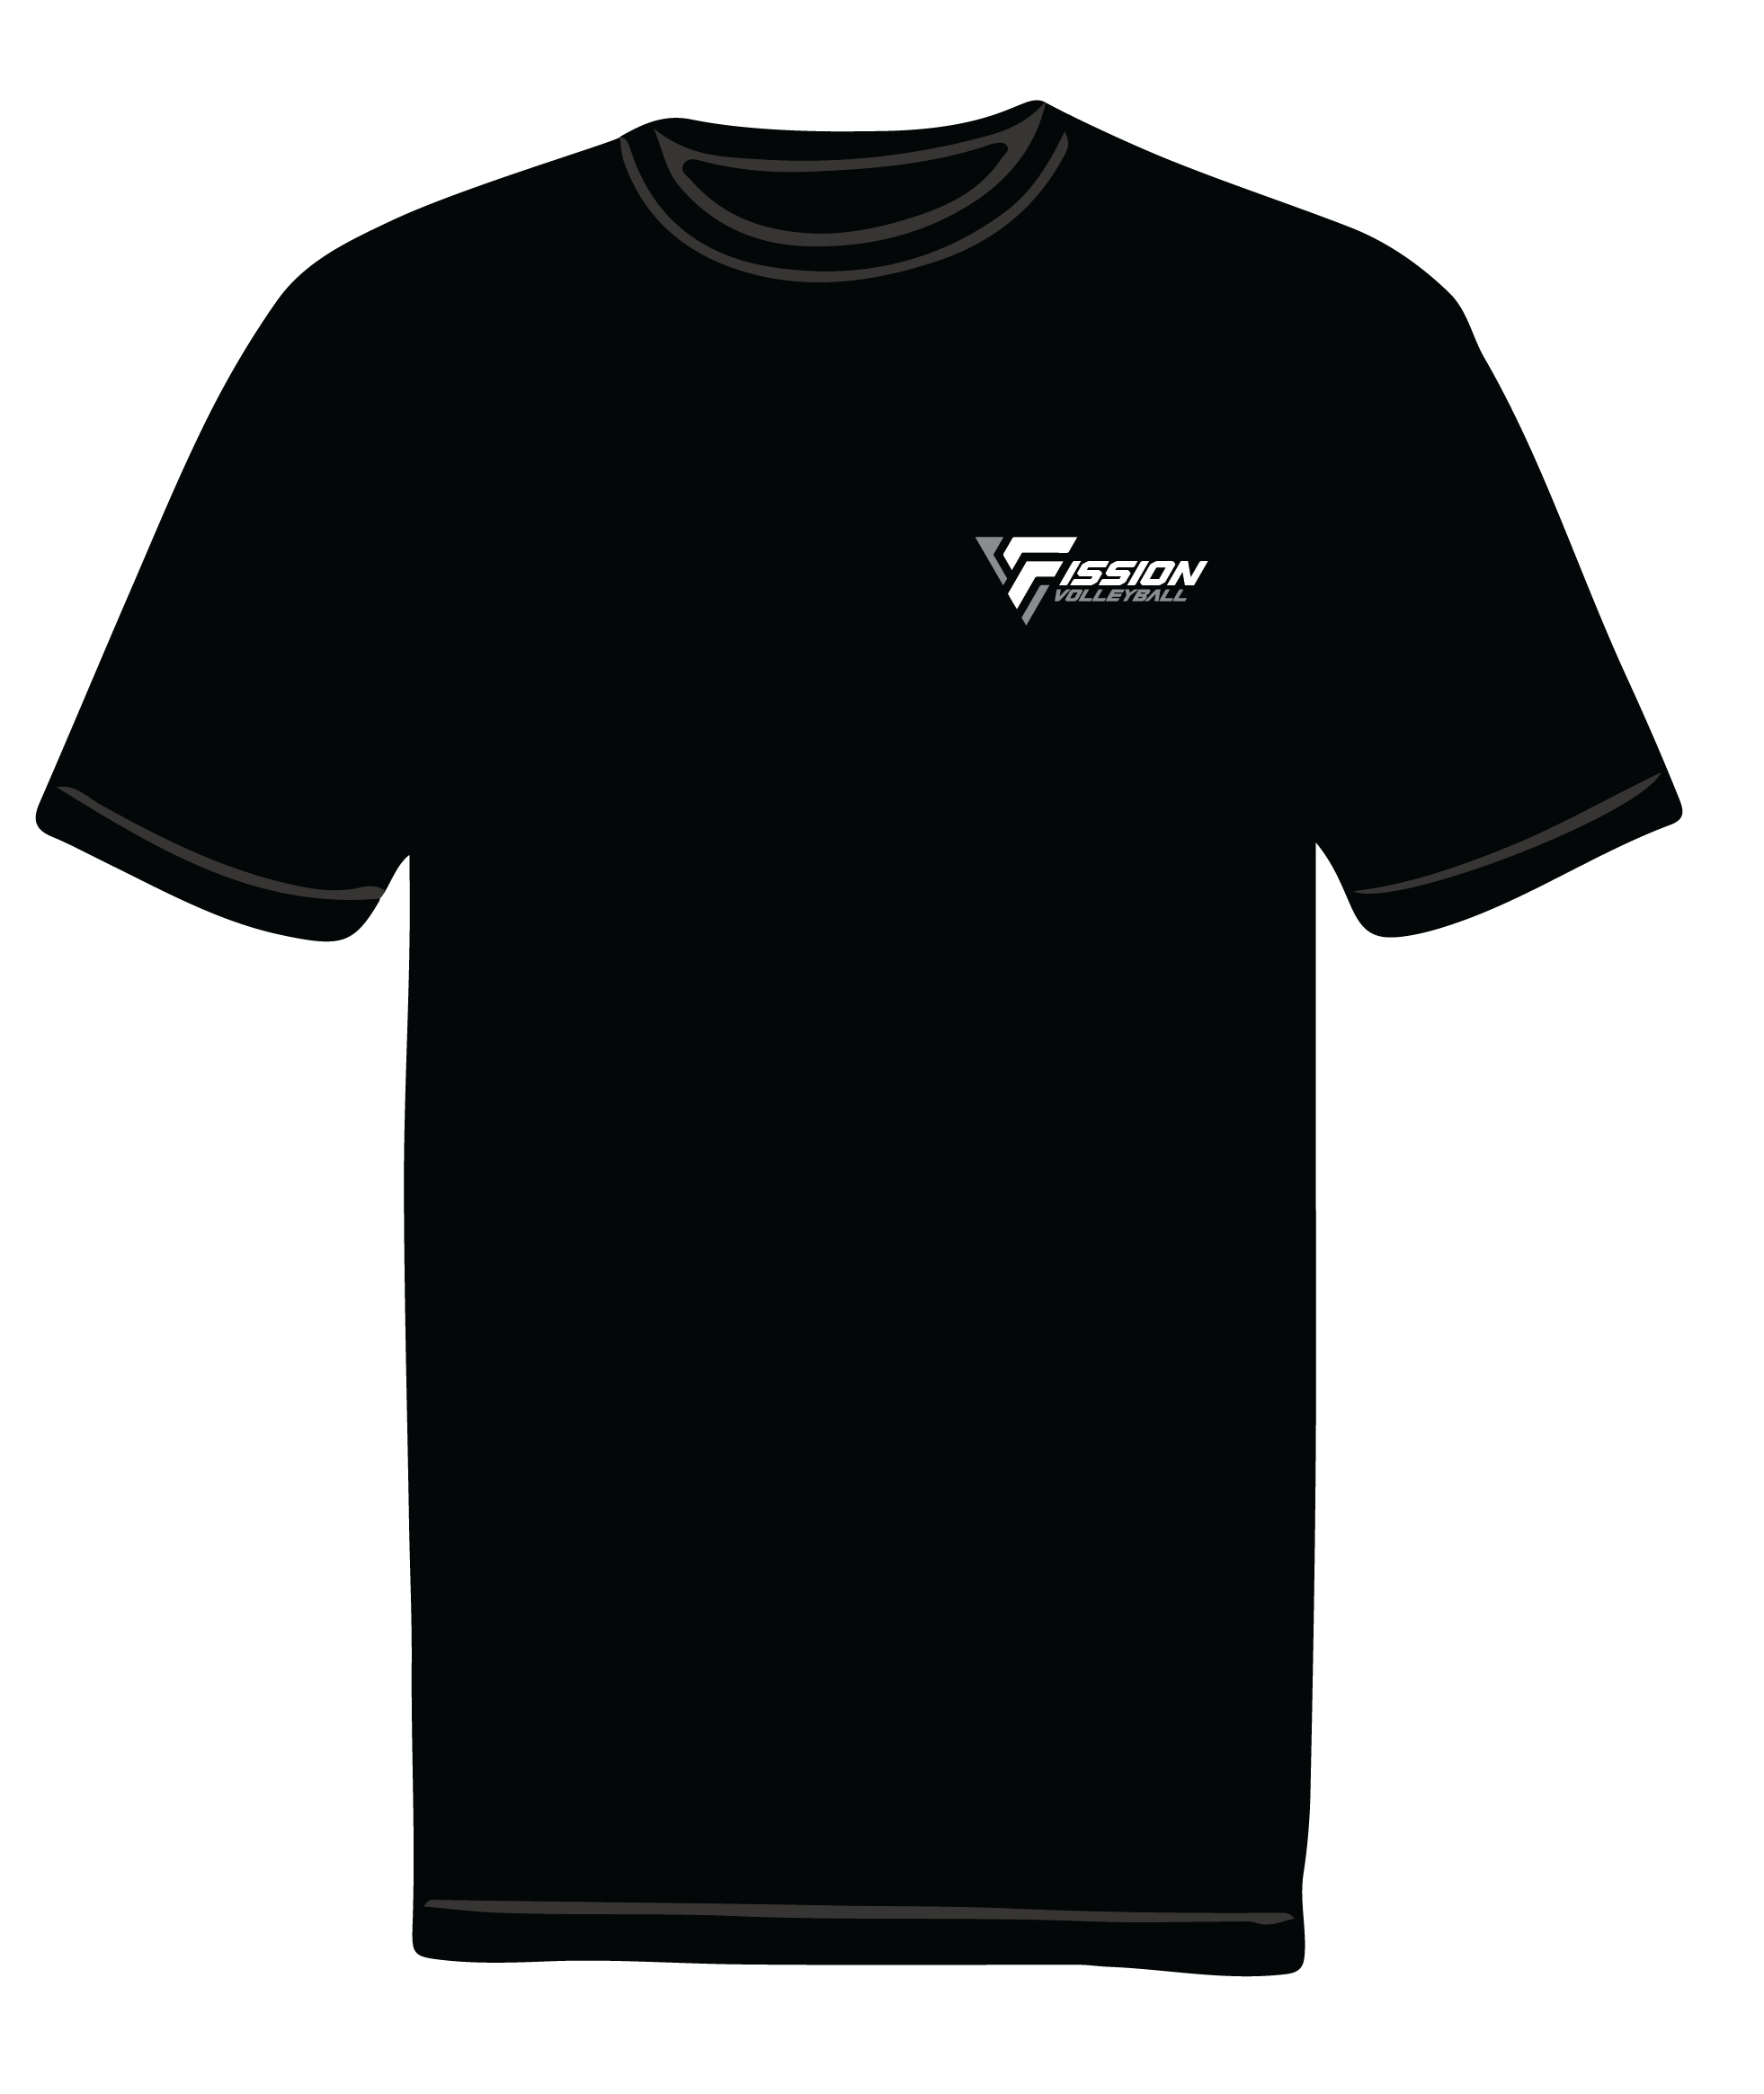 fission volleyball black shirt front